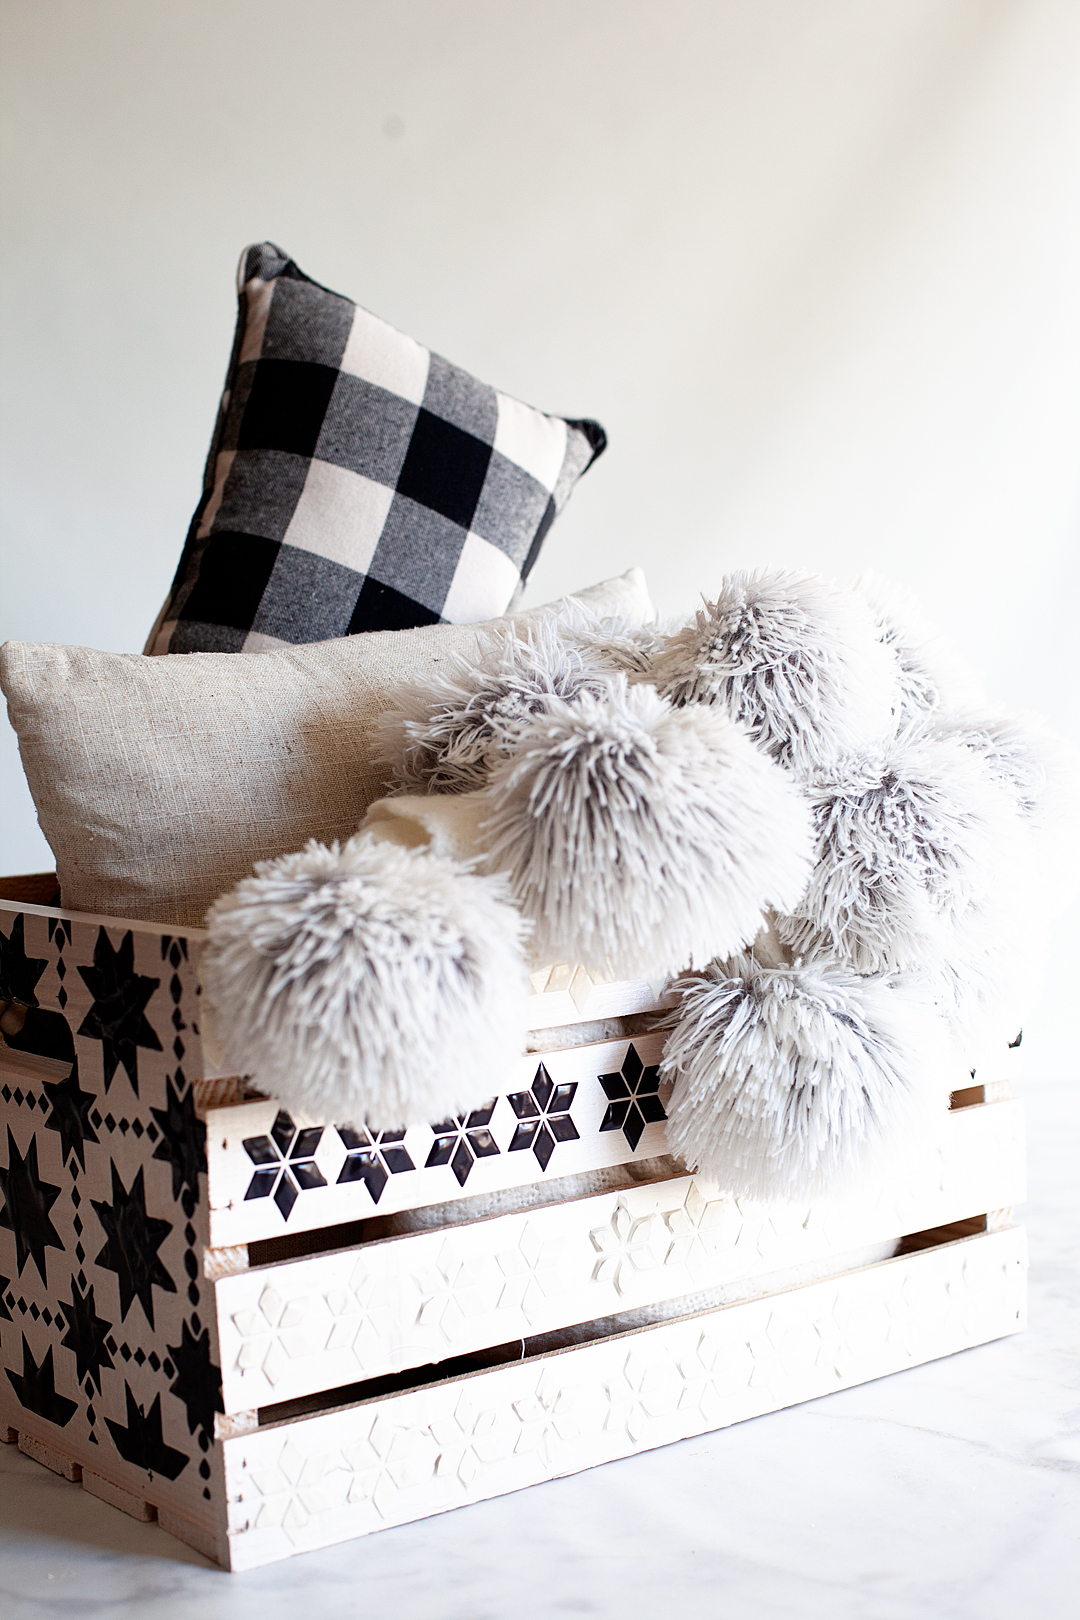 I've always loved Norwegian & Scandinavian design especially when it comes to winter designs and that was my inspiration for my new Scandinavian Style Blanket Storage Box created using Americana Decor Texture & the Americana Decor Stencils from DecoArt.